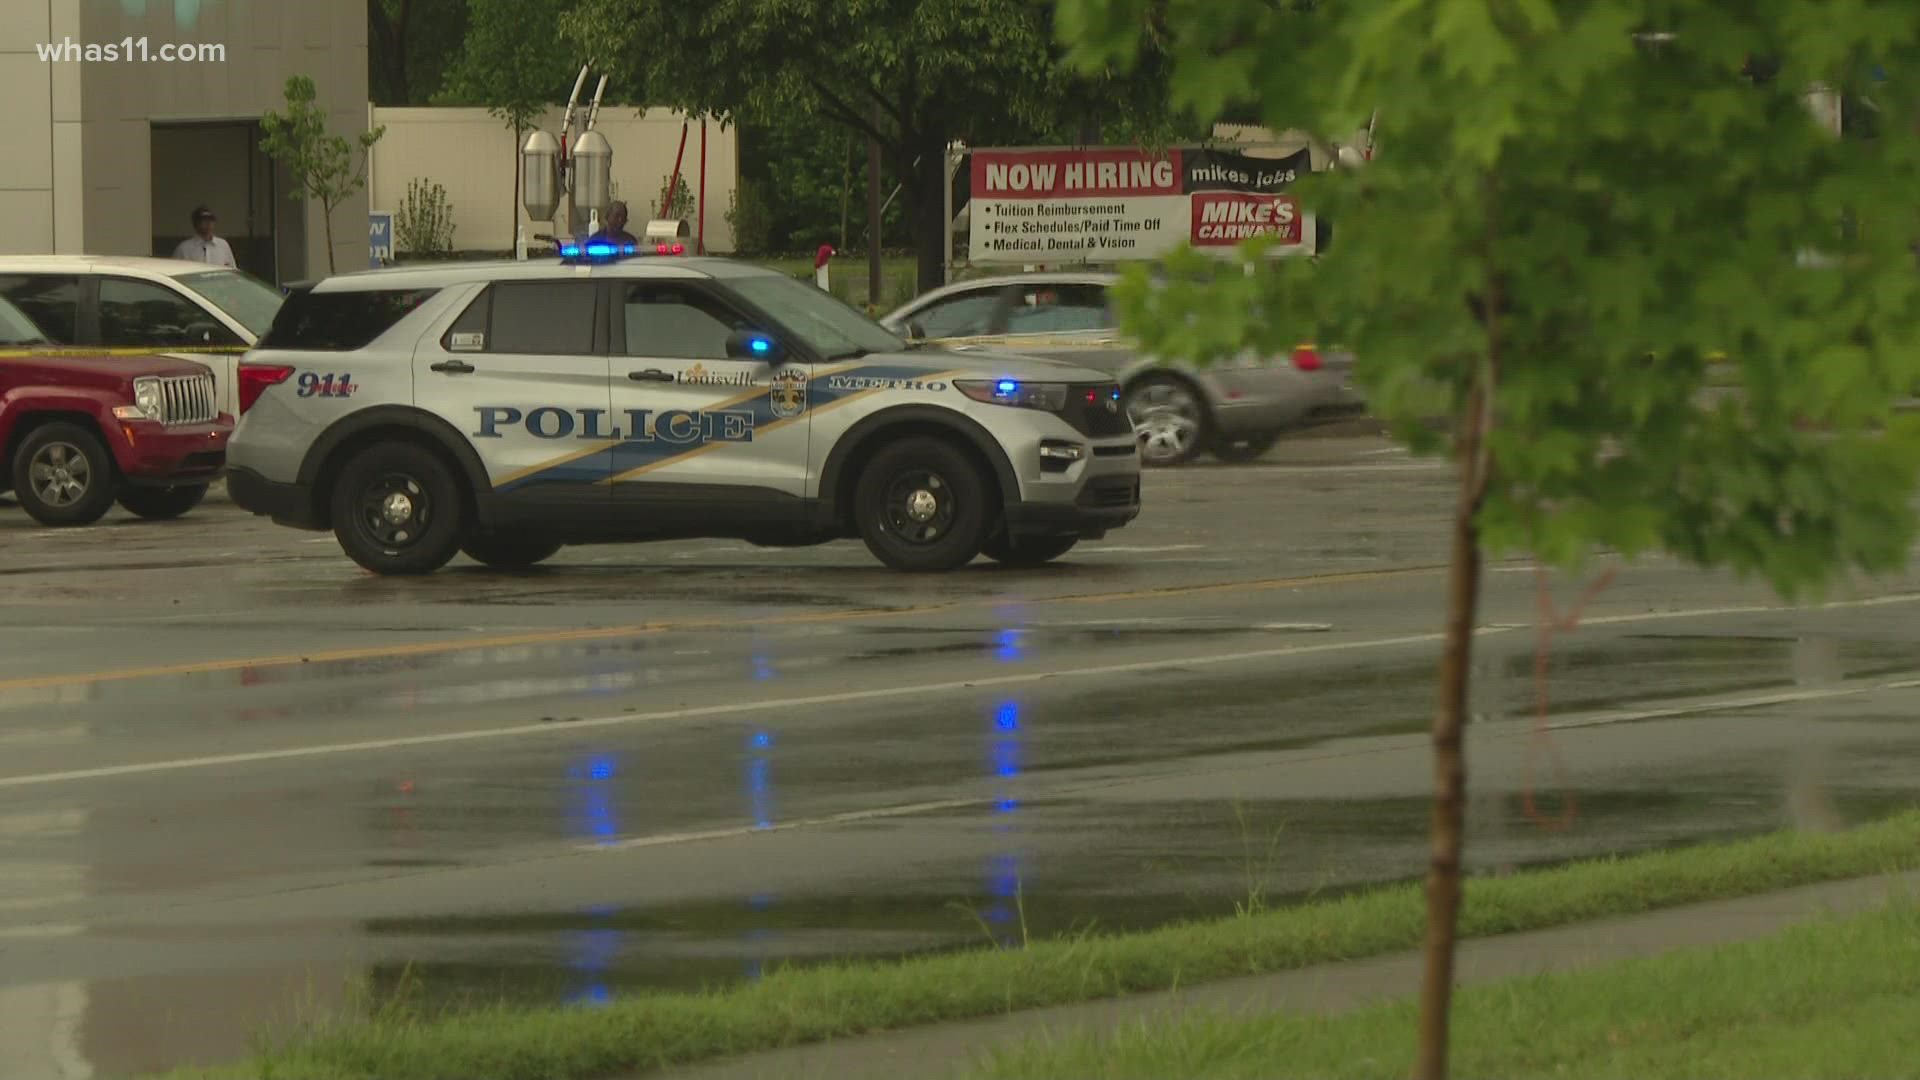 Police said the victims were shot by someone in another vehicle on Hikes Lane near Taylorsville Road just before 3 p.m. on May 14.